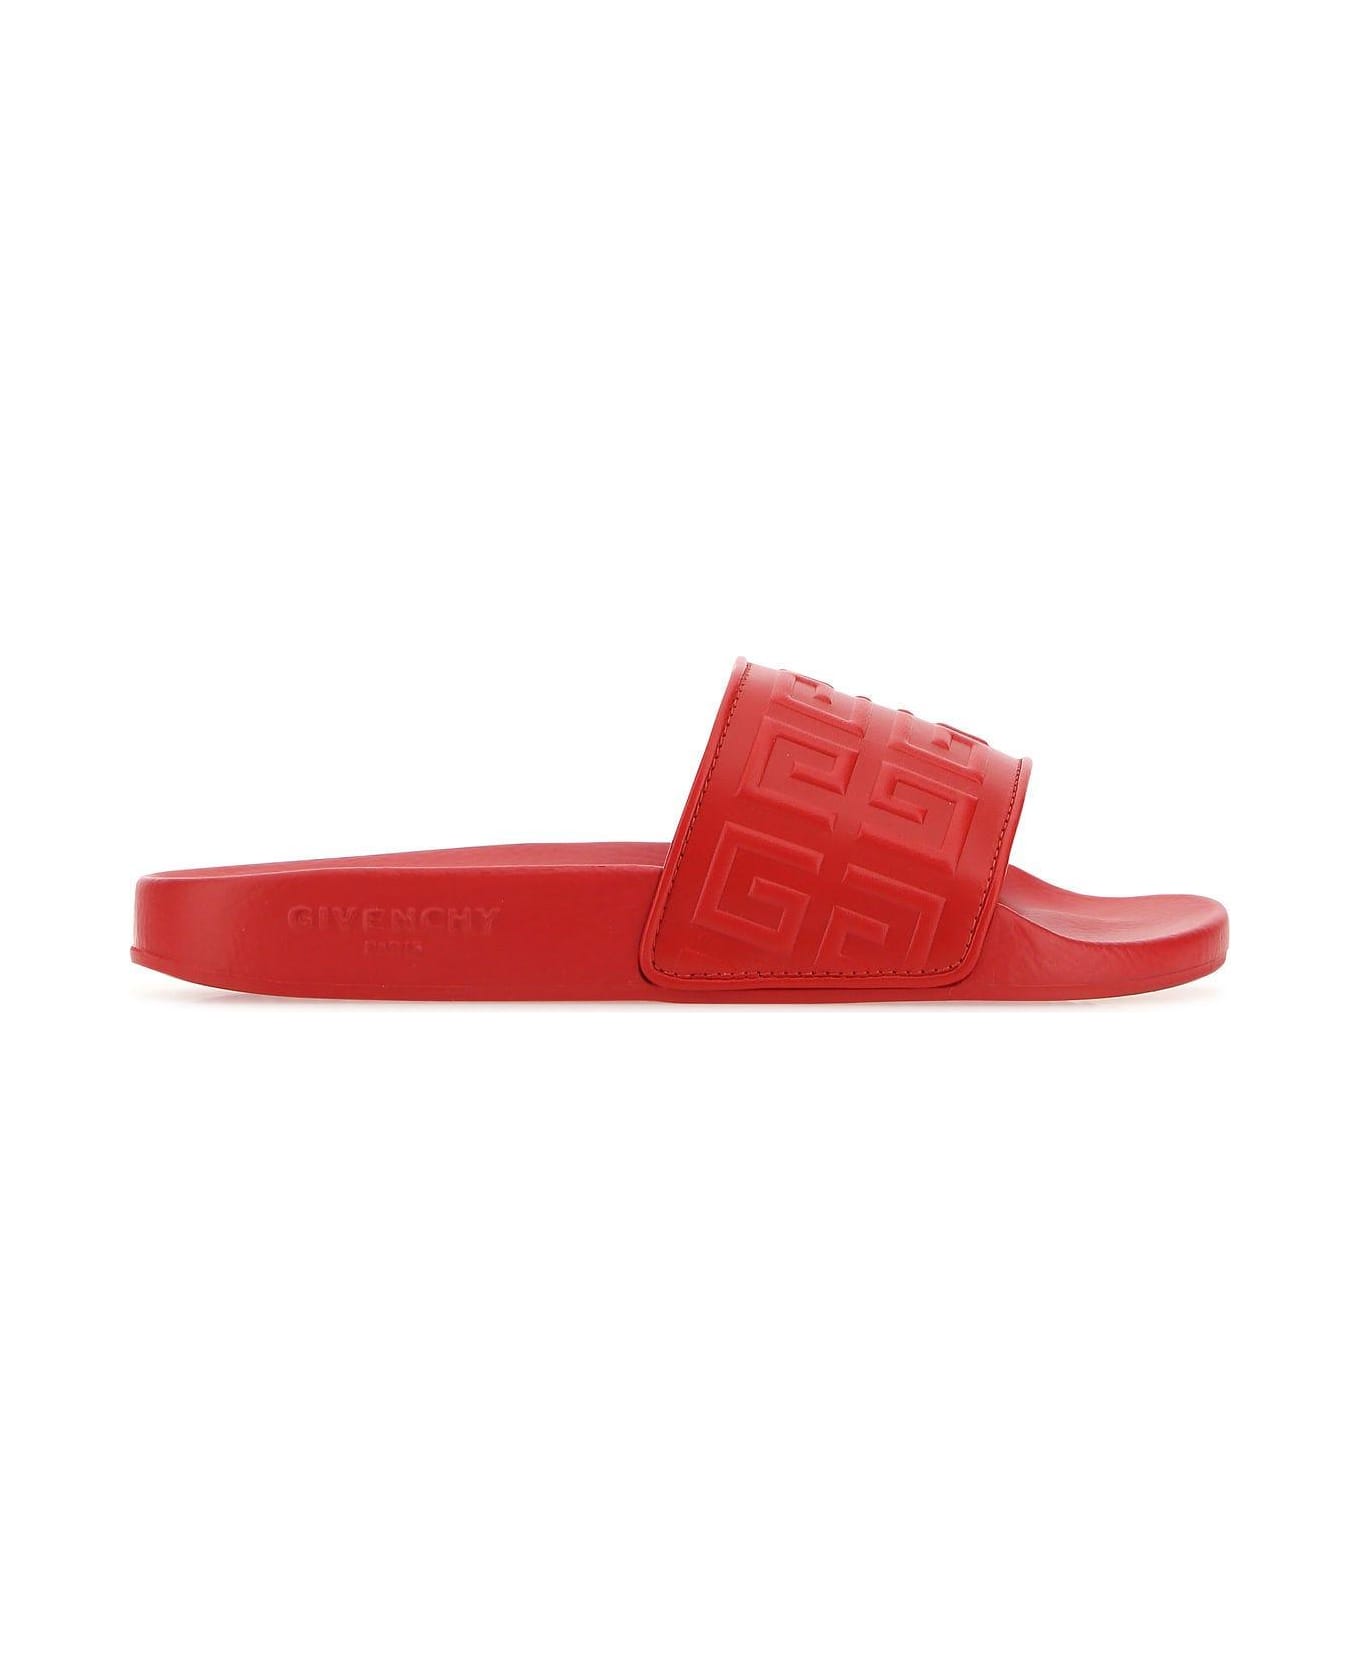 Givenchy Red Leather 4g Slippers - RED サンダル